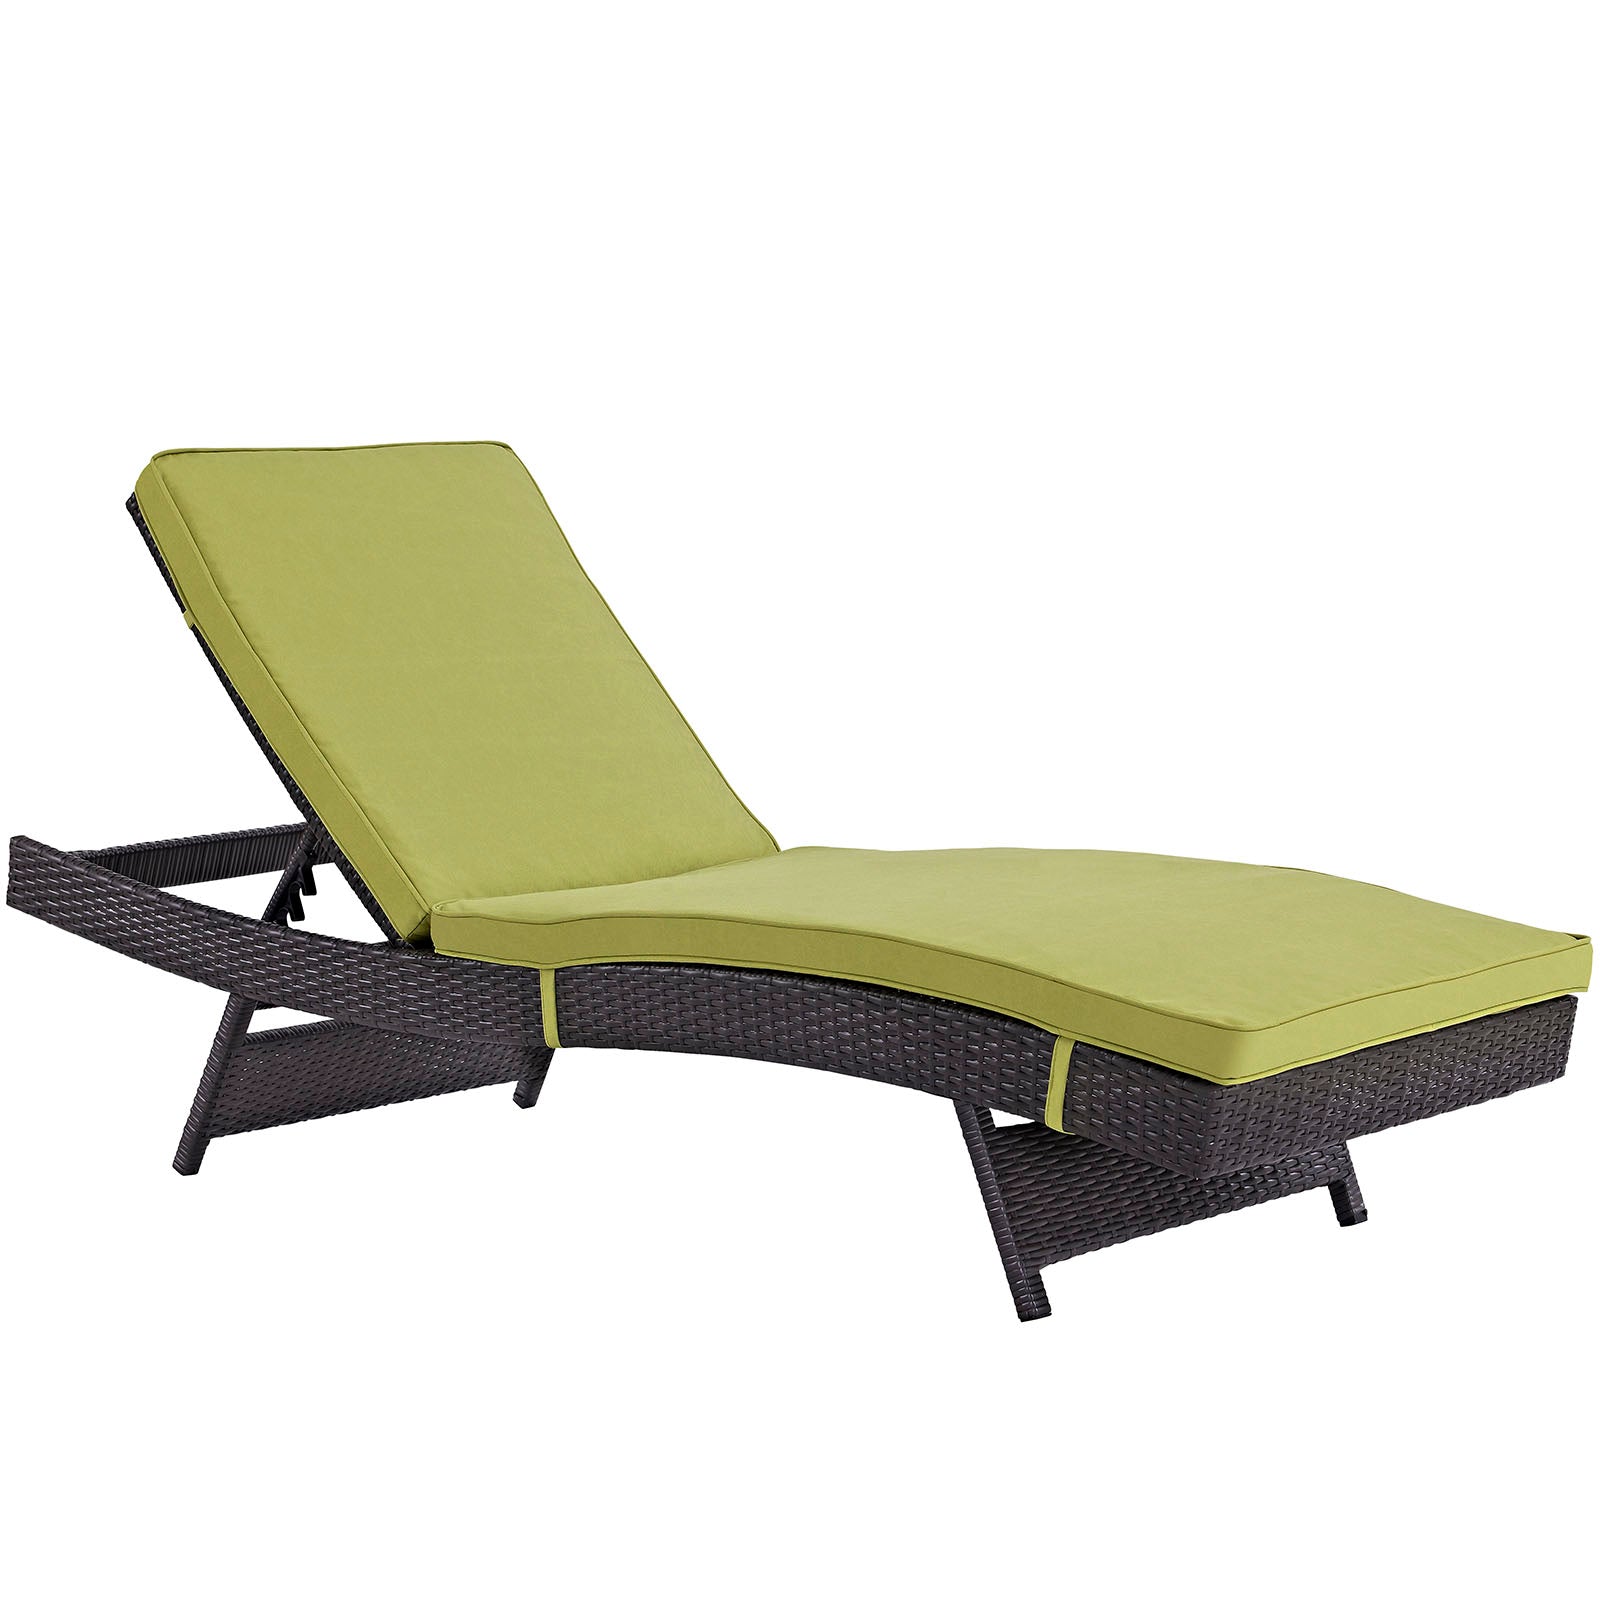 Convene Chaise Outdoor Patio Set of 4 - East Shore Modern Home Furnishings